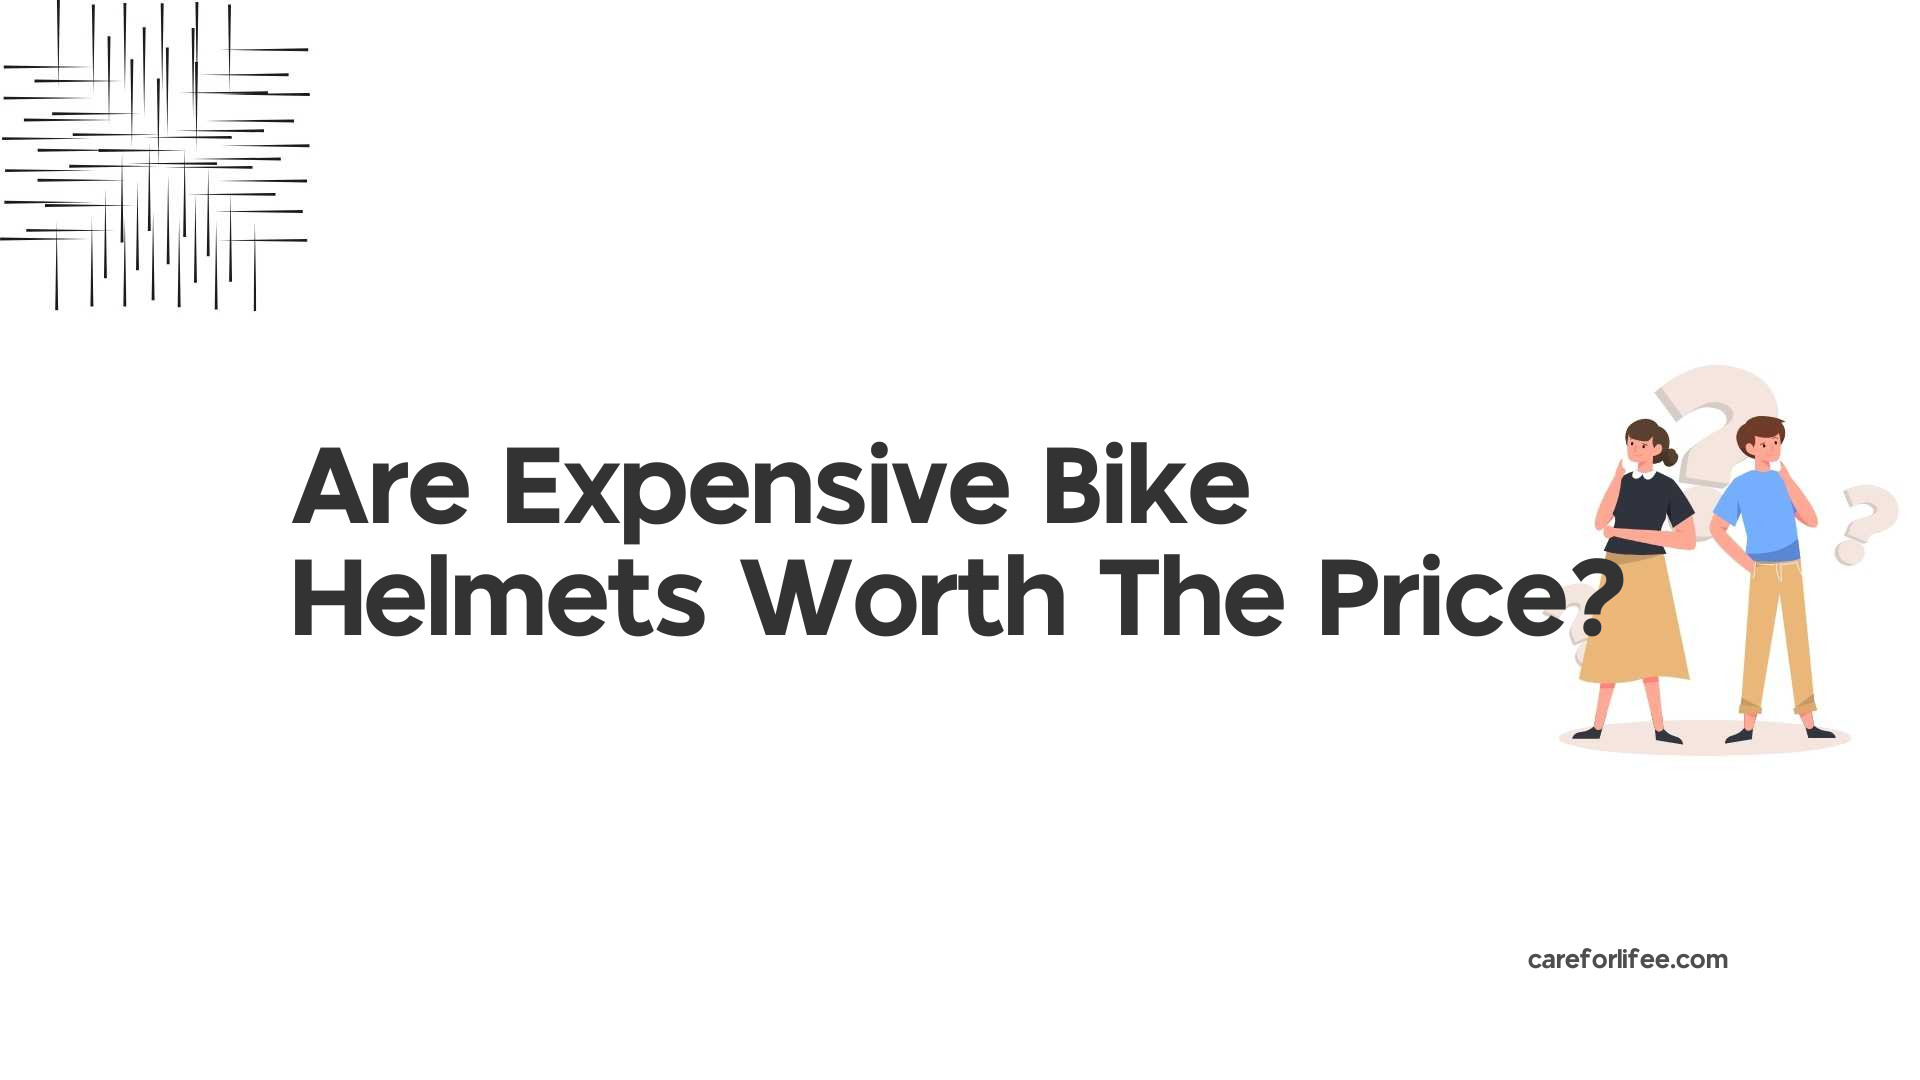 Are Expensive Bike Helmets Worth The Price?